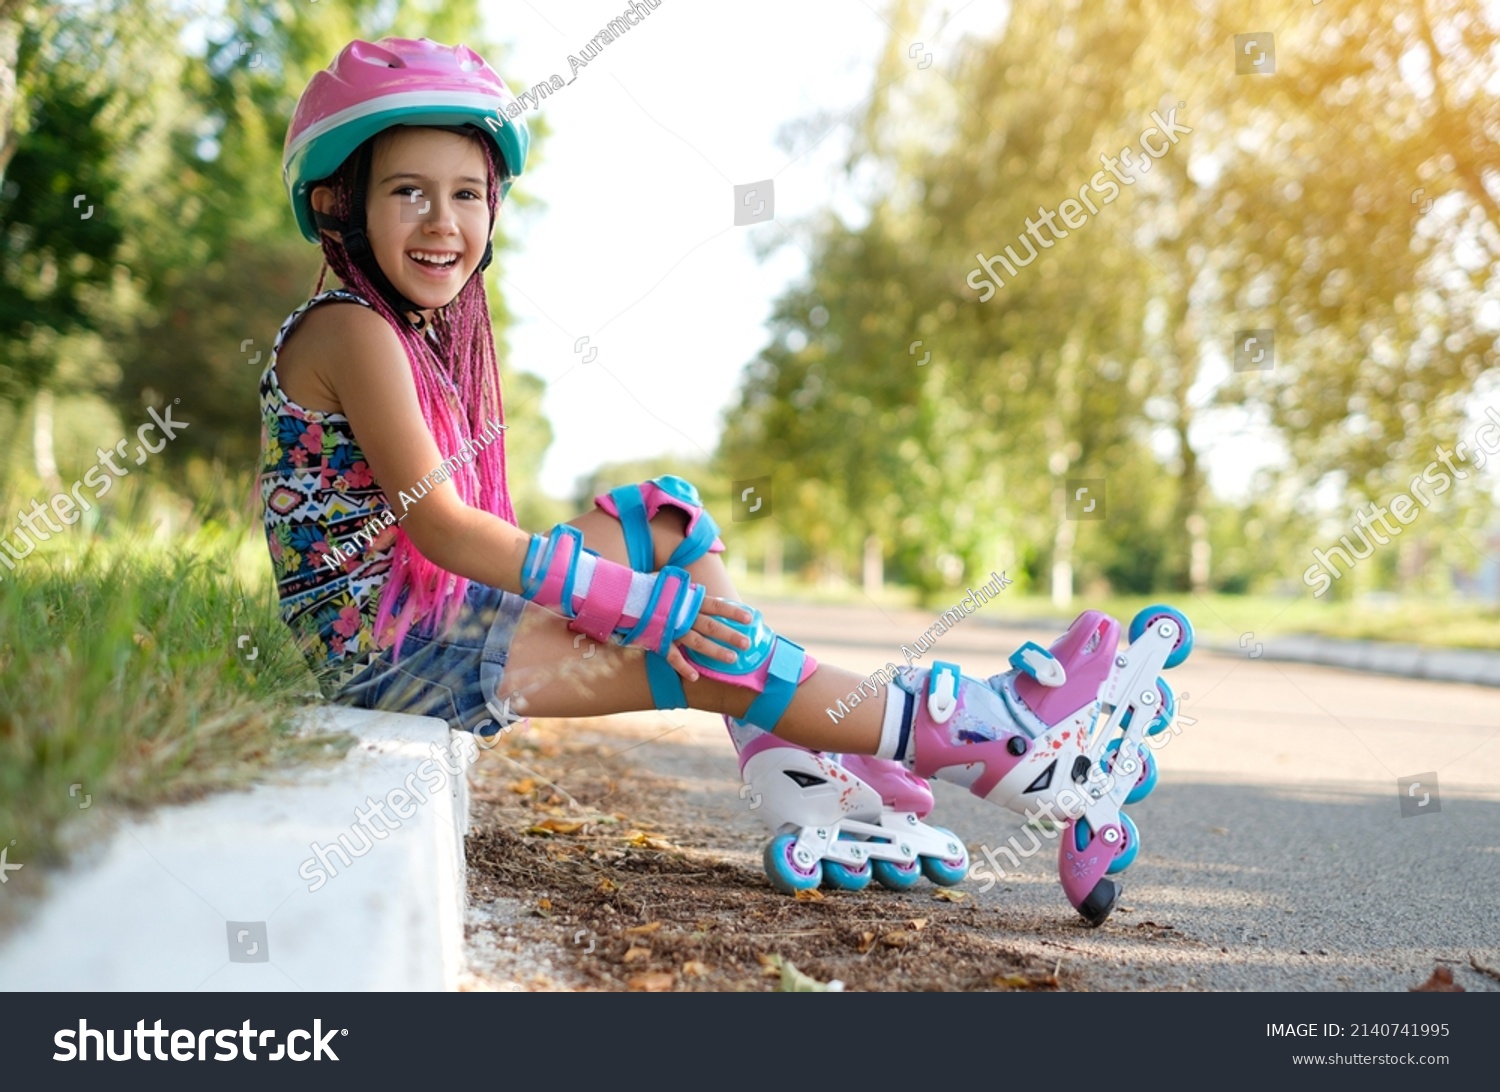 Laughing loudly, a funny girl with Afro-pigtails and wearing sports protective gloves and a helmet sat down to rest on the sidewalk after roller skating. A child's favorite hobby is roller skates. #2140741995